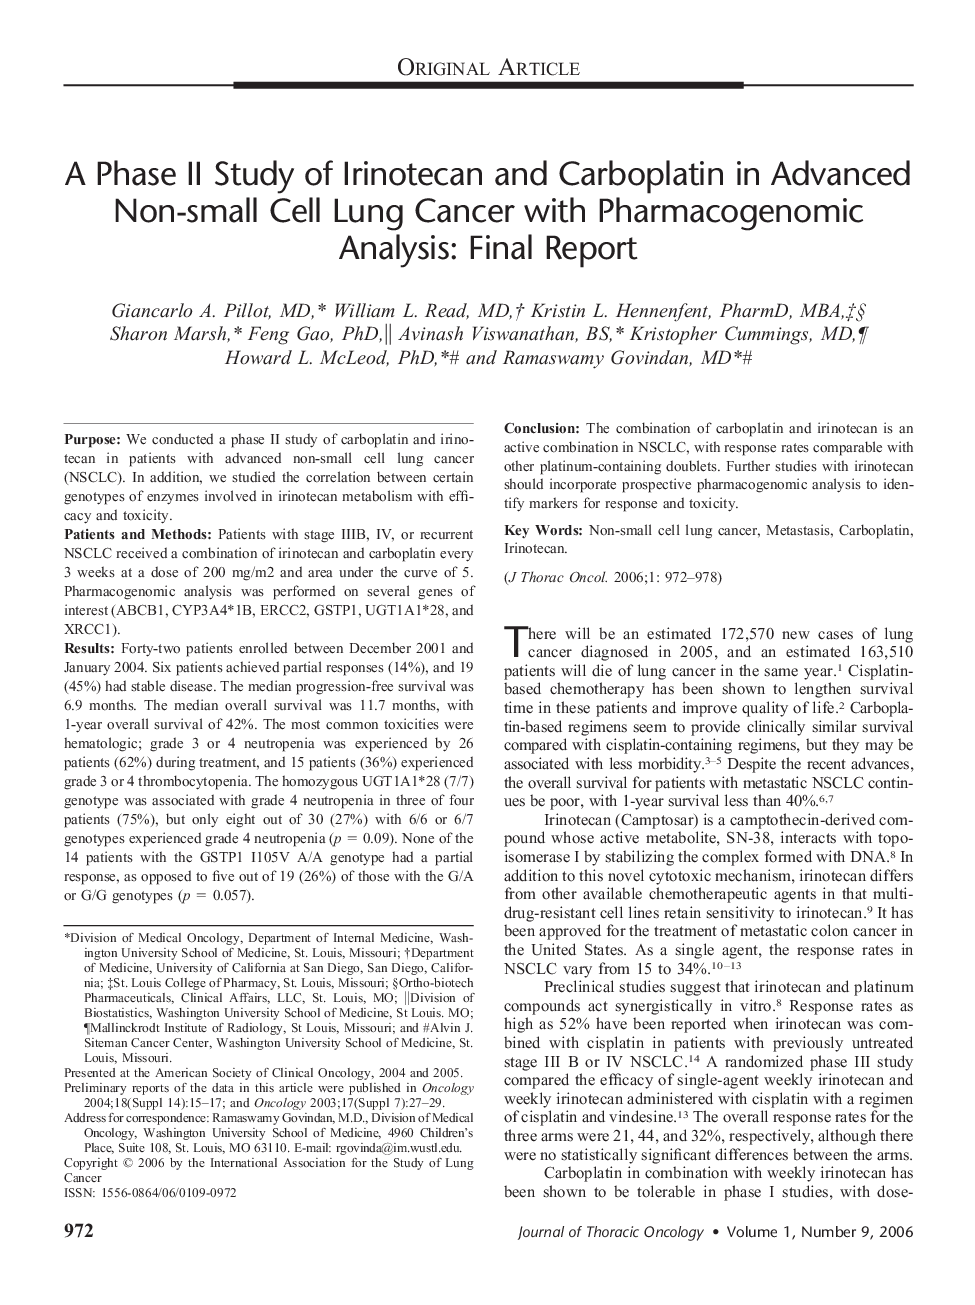 A Phase II Study of Irinotecan and Carboplatin in Advanced Non-small Cell Lung Cancer with Pharmacogenomic Analysis: Final Report